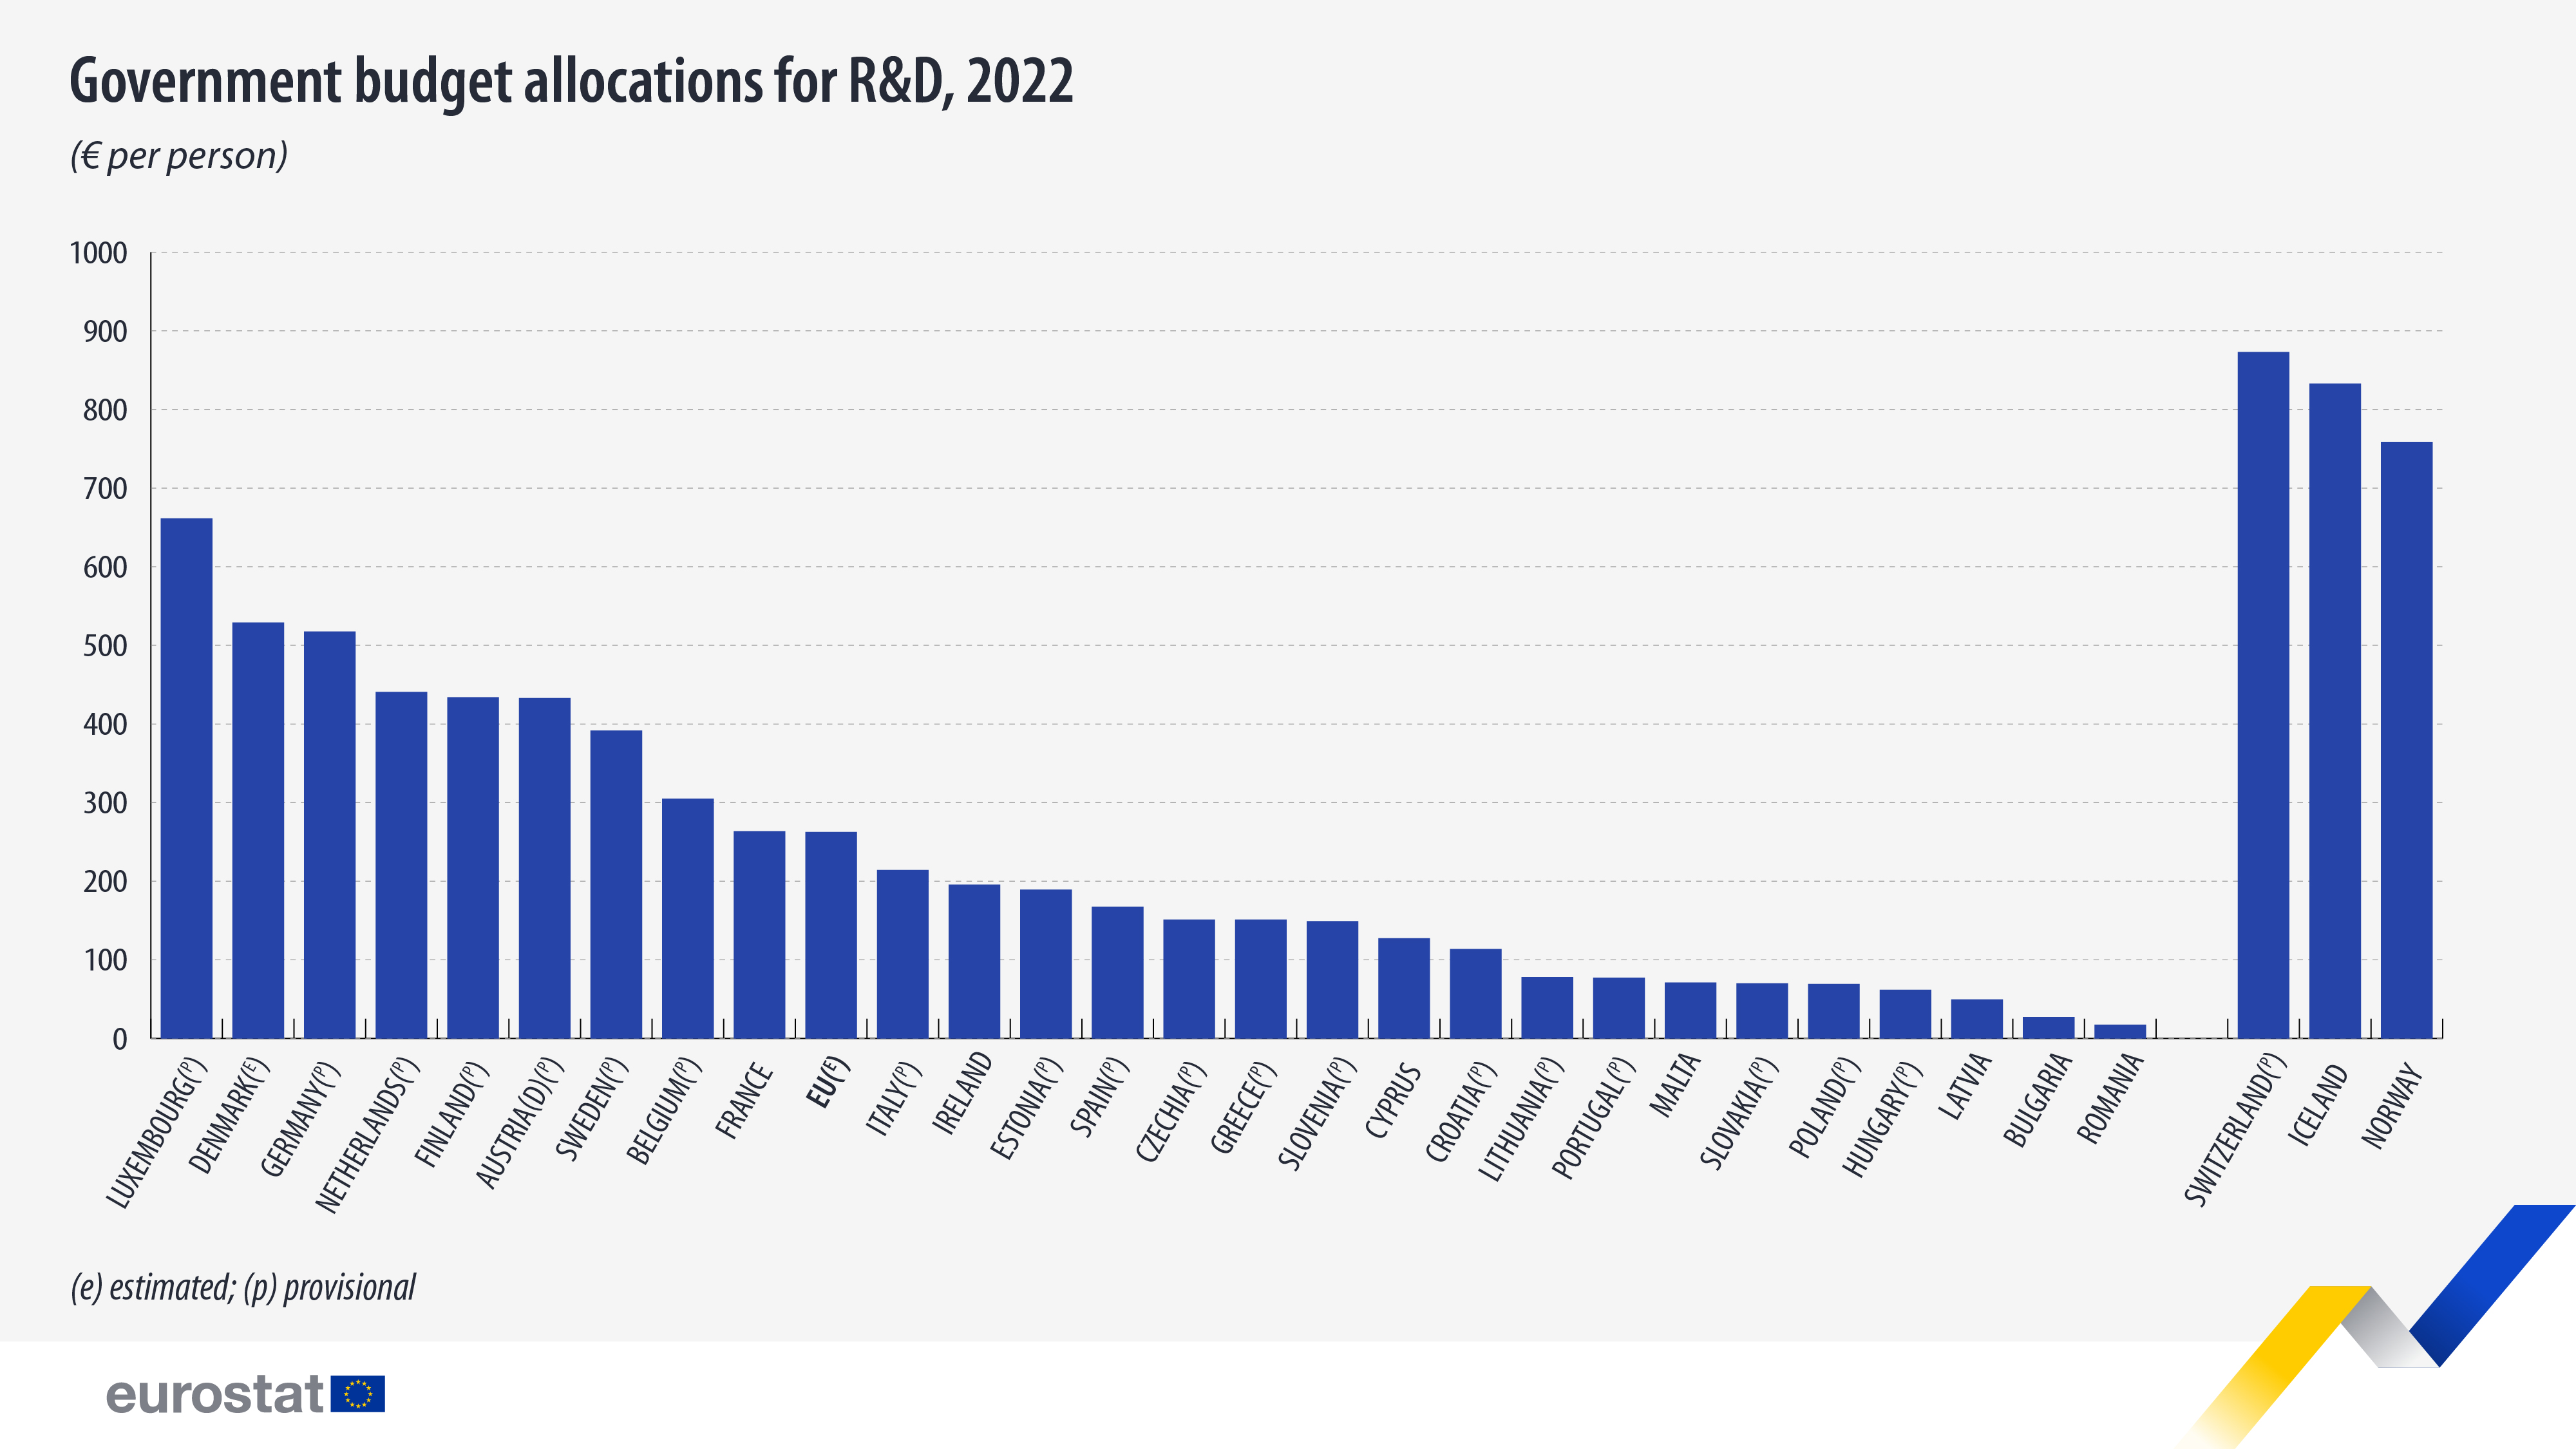 Bar chart: government budget allocations for R&D, 2022, € per person